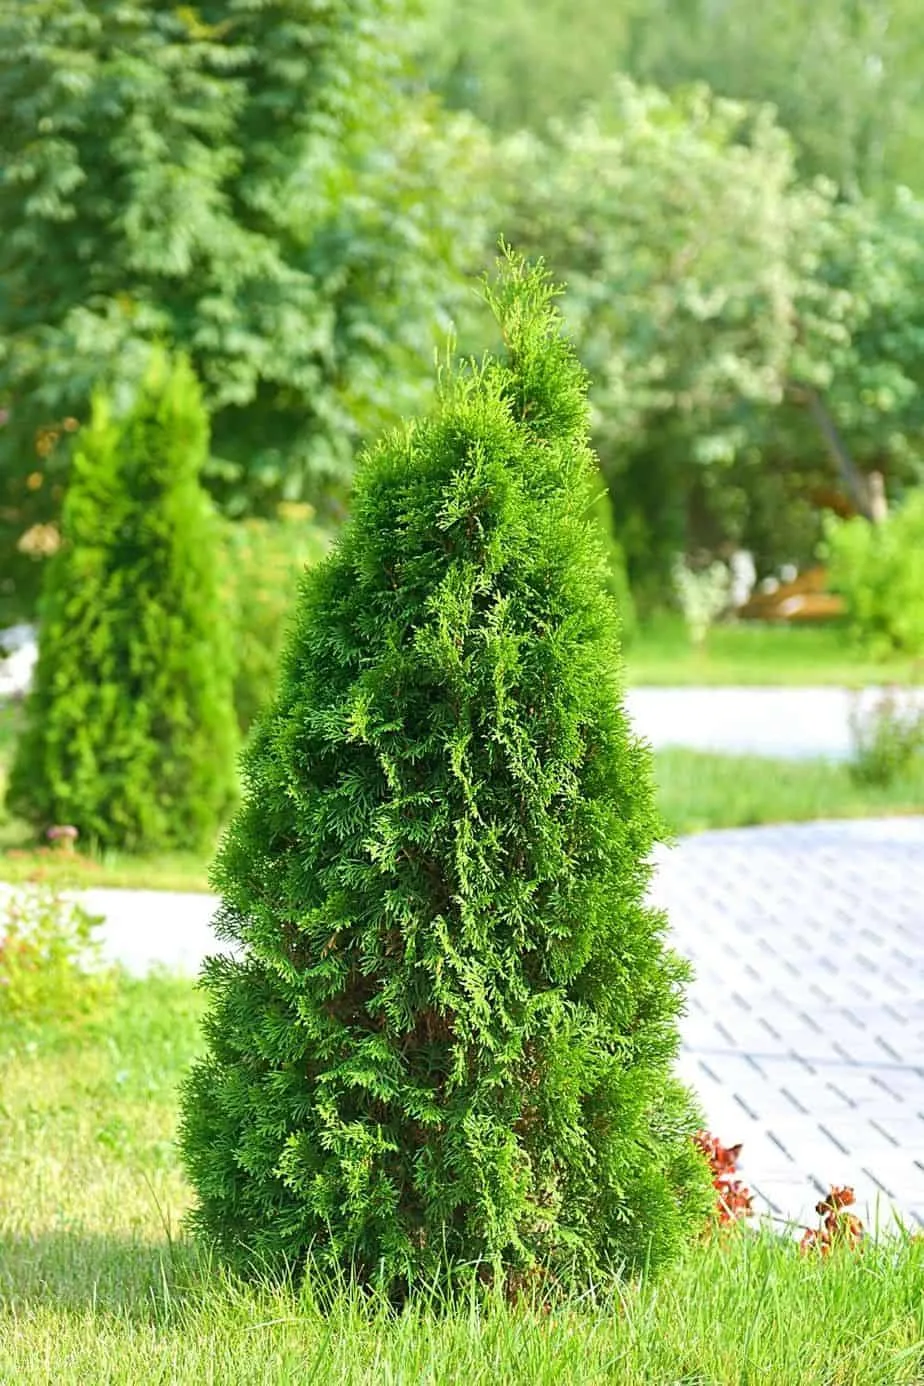 Arborvitae is one of the most preferred plants for privacy